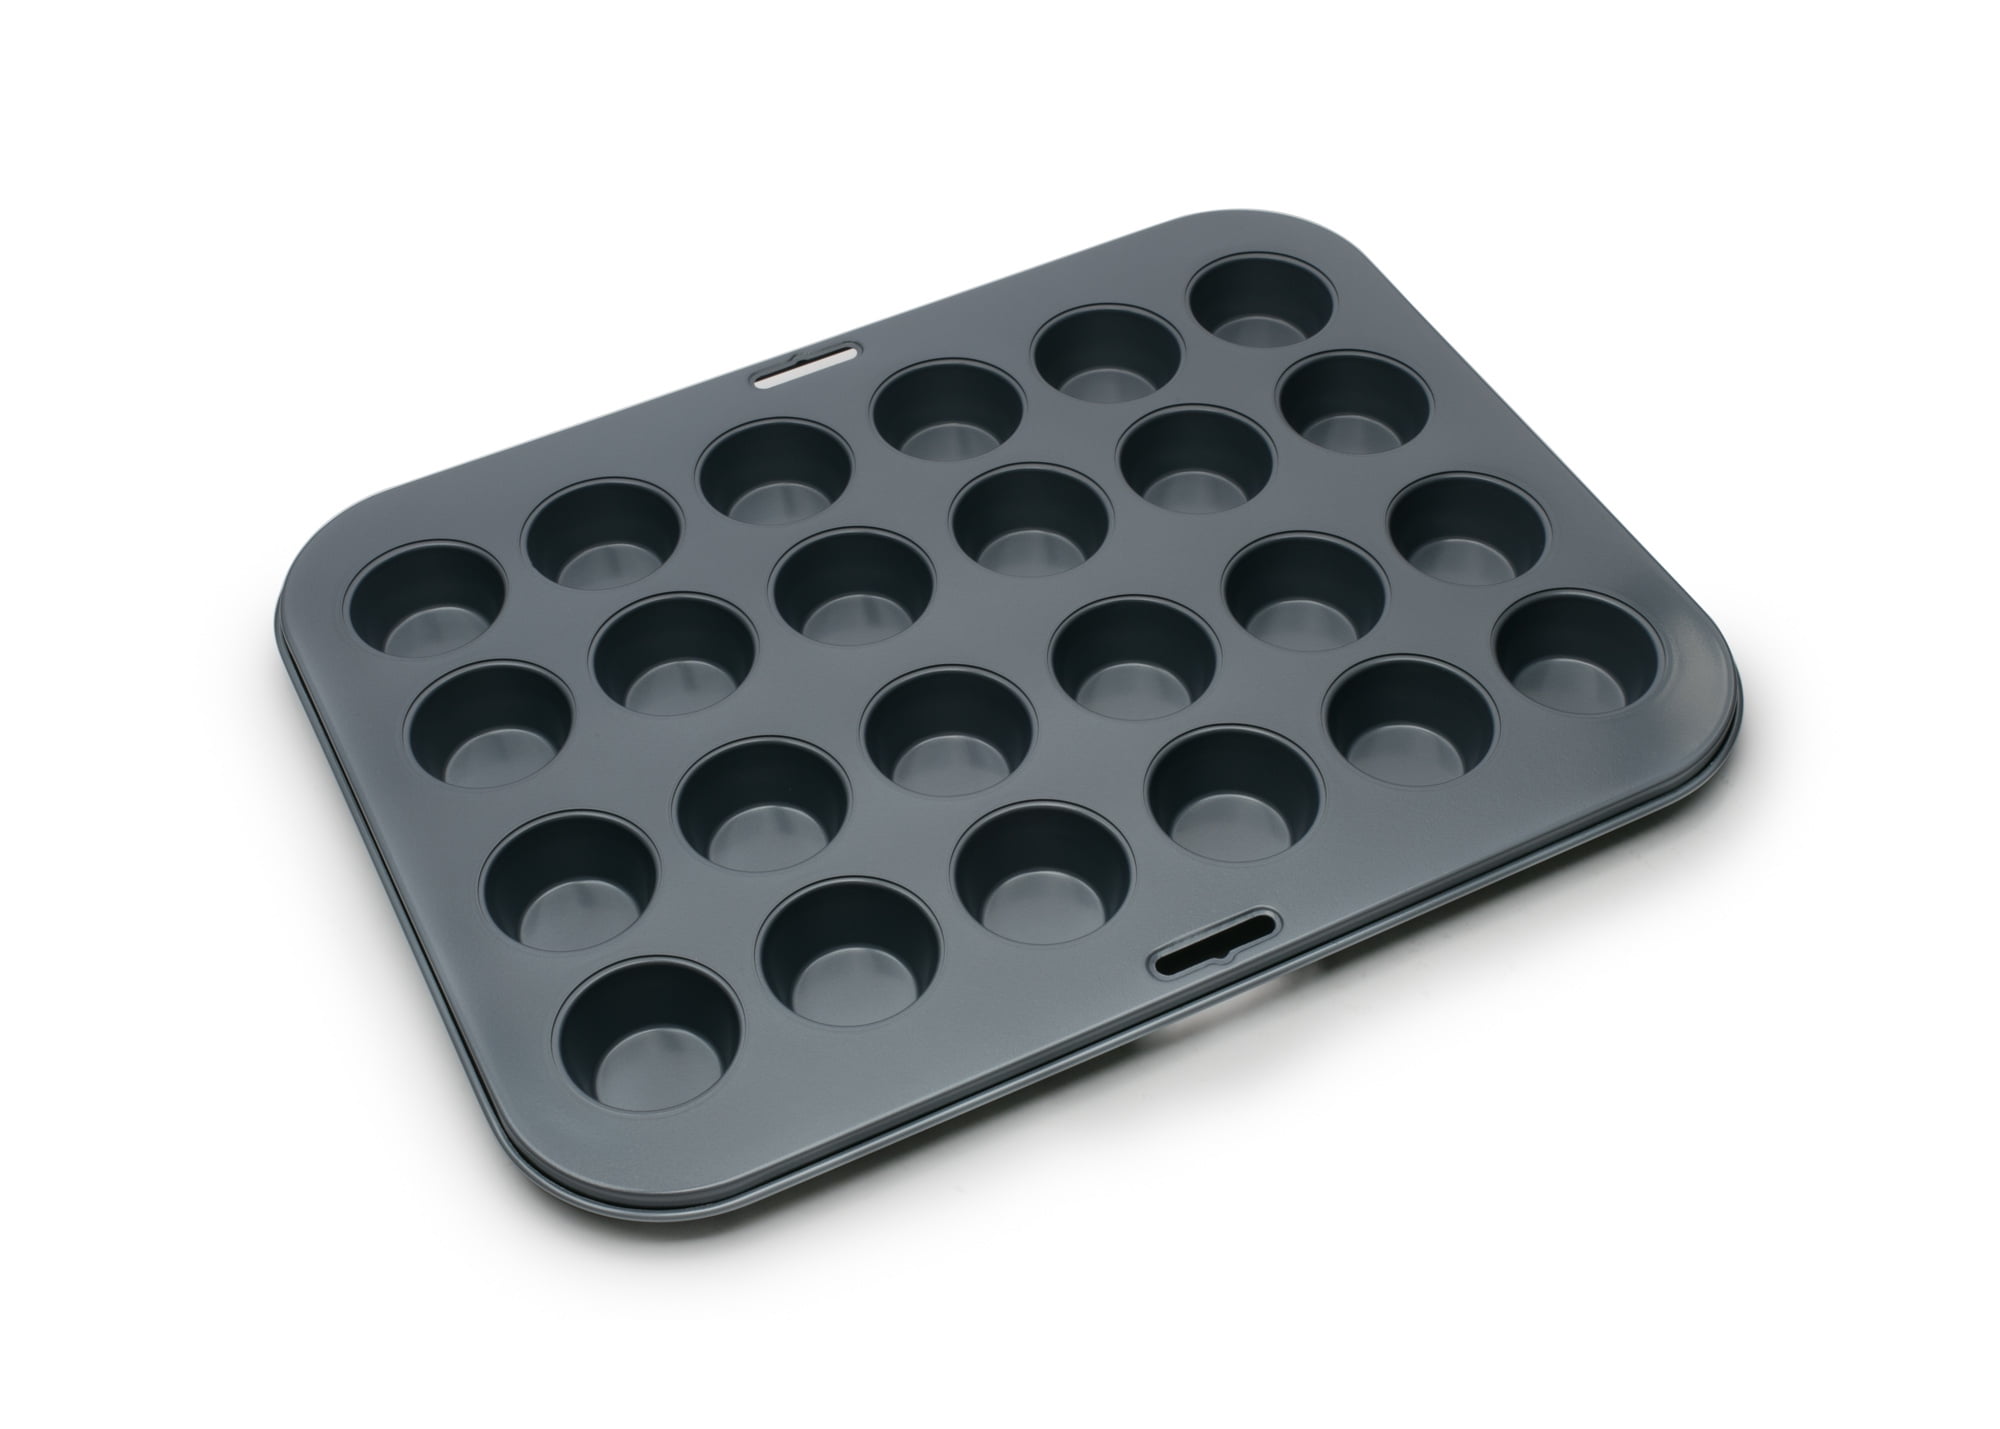 qucoqpe Kitchen Silicone Muffin Pan - Mini 24 Cup Cupcake Pan Silicone Molds  - Mini Muffin Pans Nonstick 24 Muffin Tin - Baking Rubber Tray & Fat Bomb  Baking Cups 